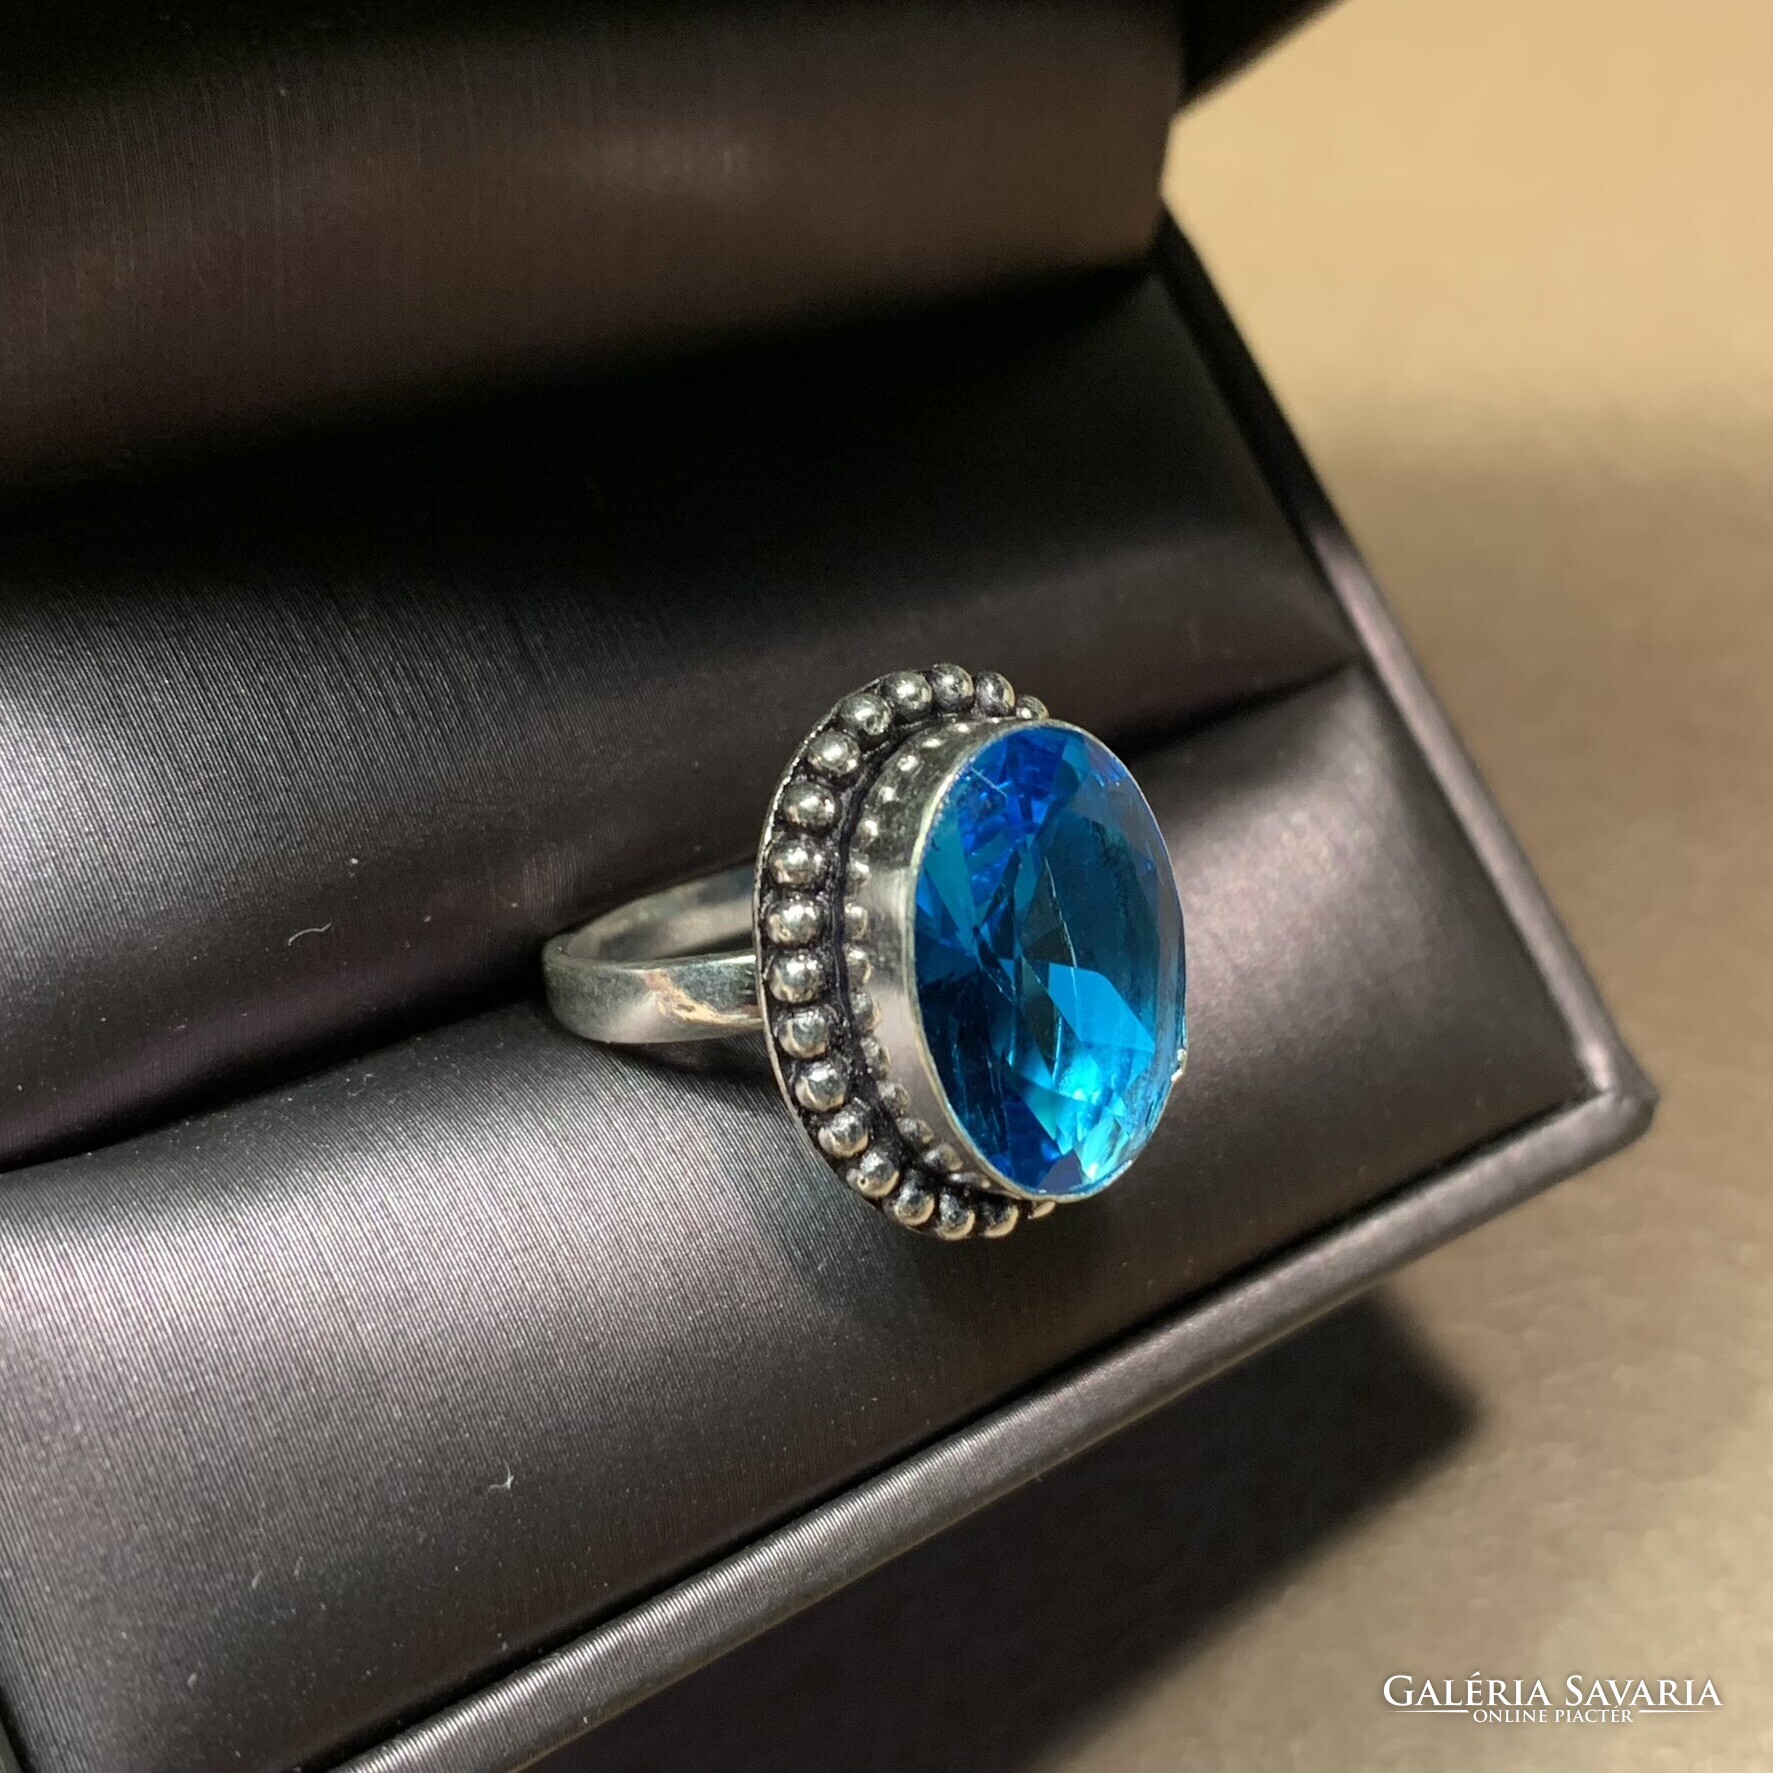 925 Silver Ring with Blue Topaz Stone Size 7 (17.2mm Diameter